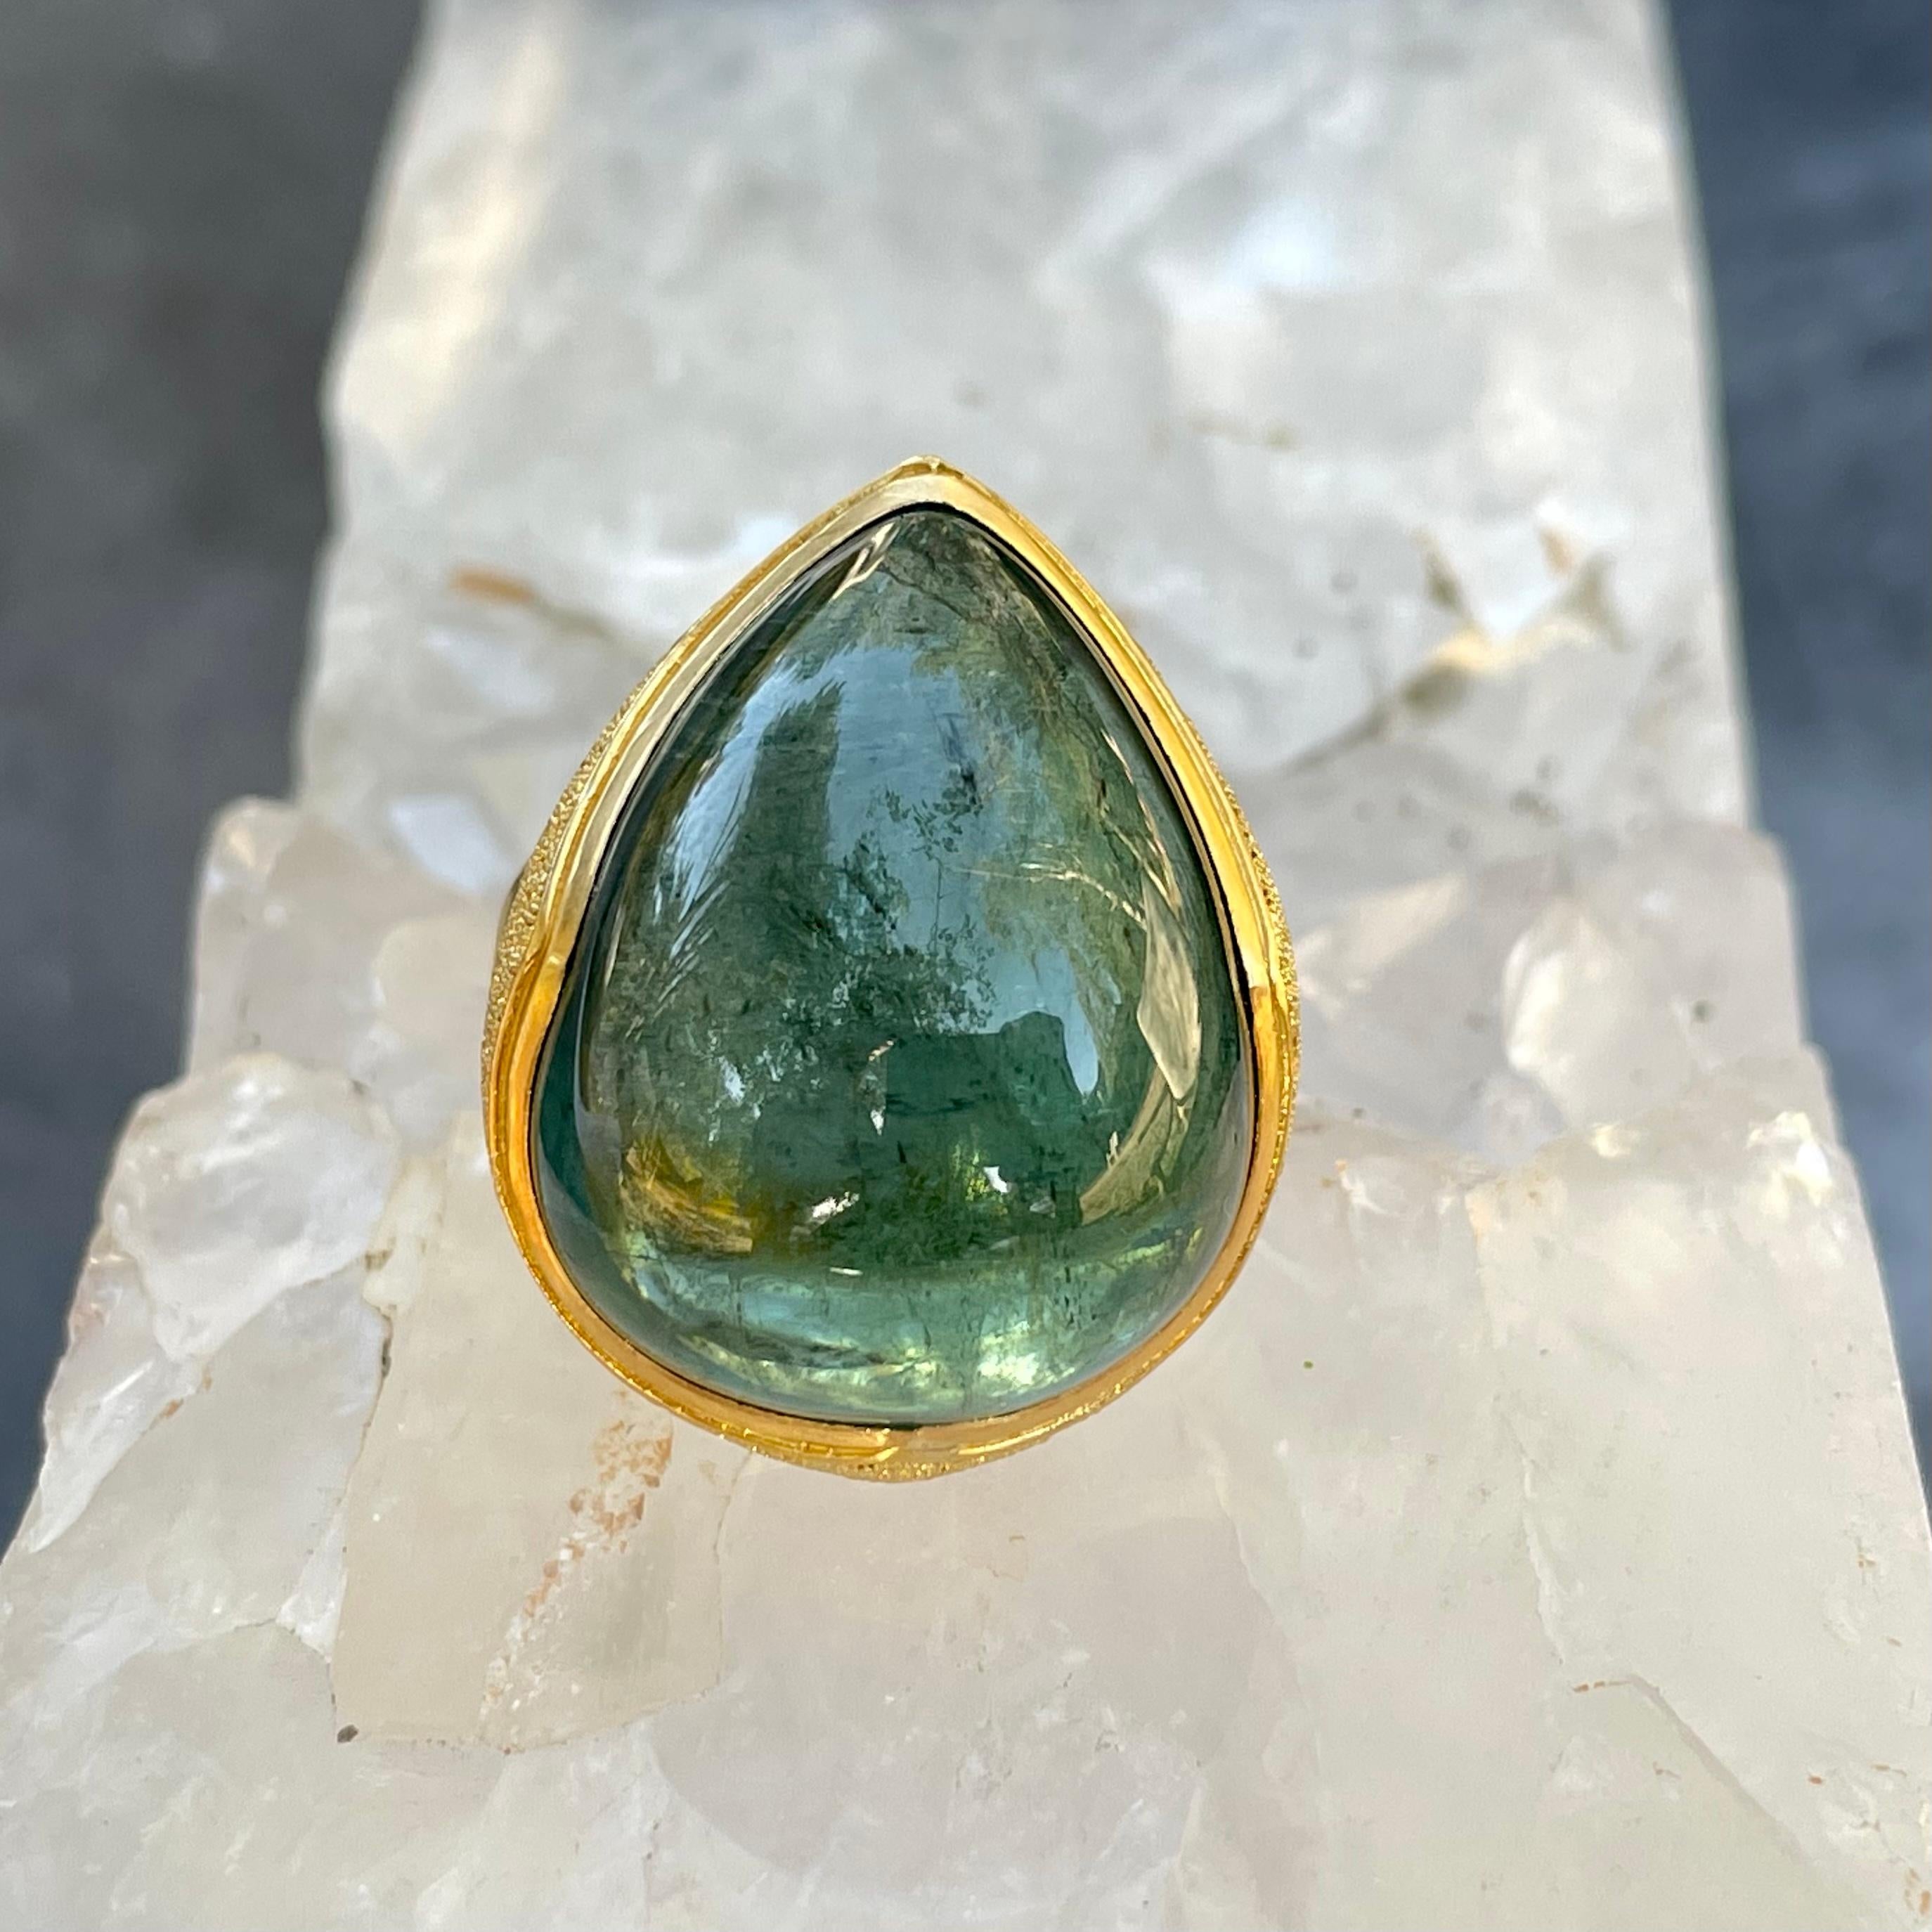 A large, juicy, gumdrop of a Brazilian blue-green indicolite tourmaline (one of the rarest colors of tourmaline) is held lovingly in a signature Steven Battelle ancient-inspired 